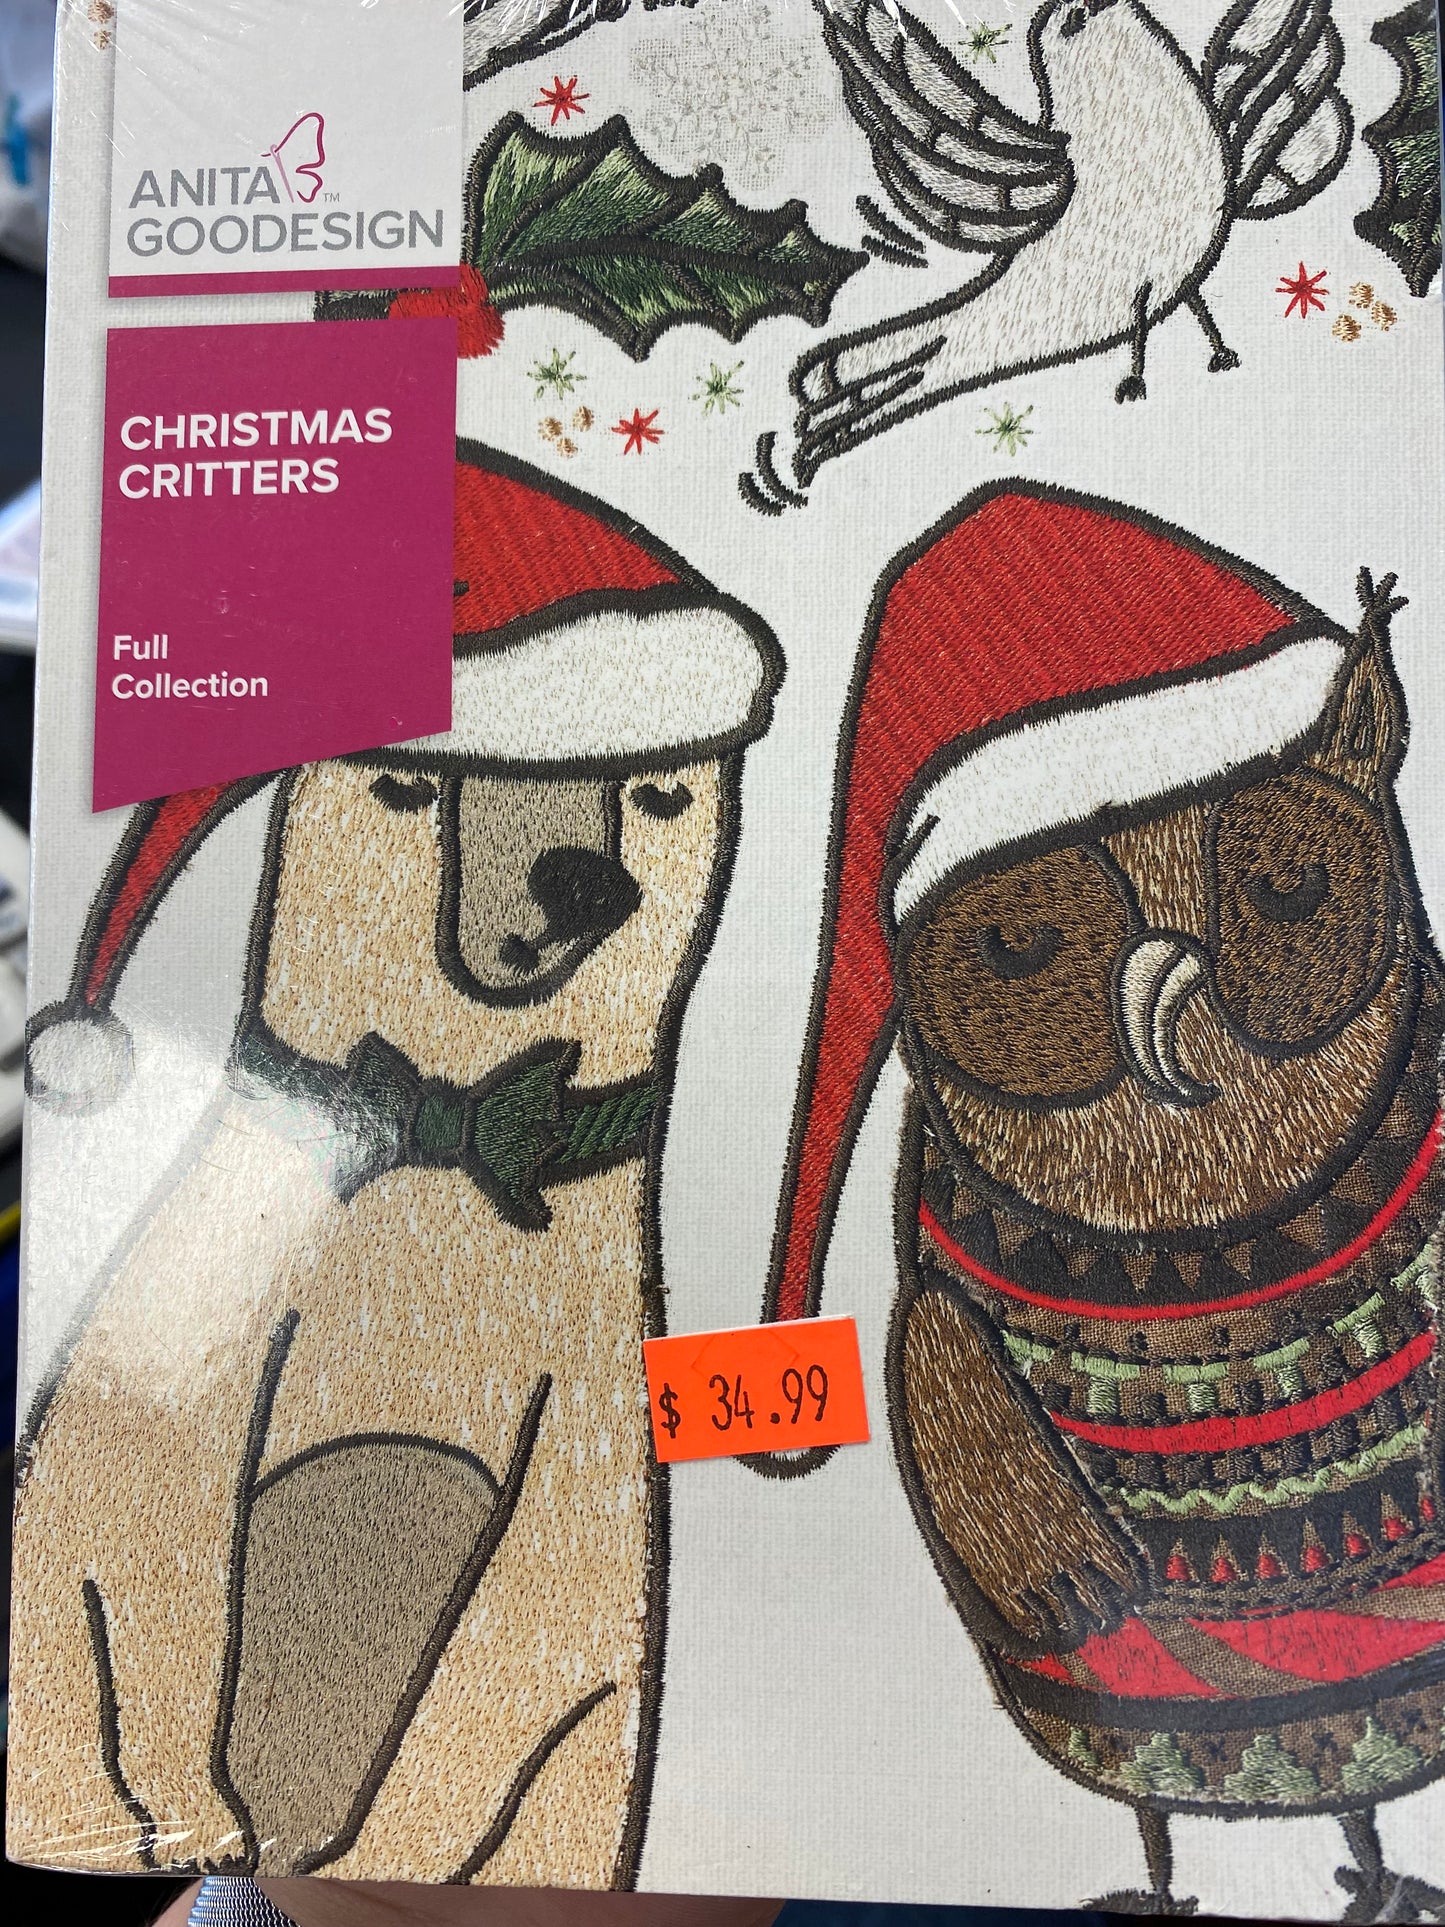 Christmas Critters by Anita Goodesign